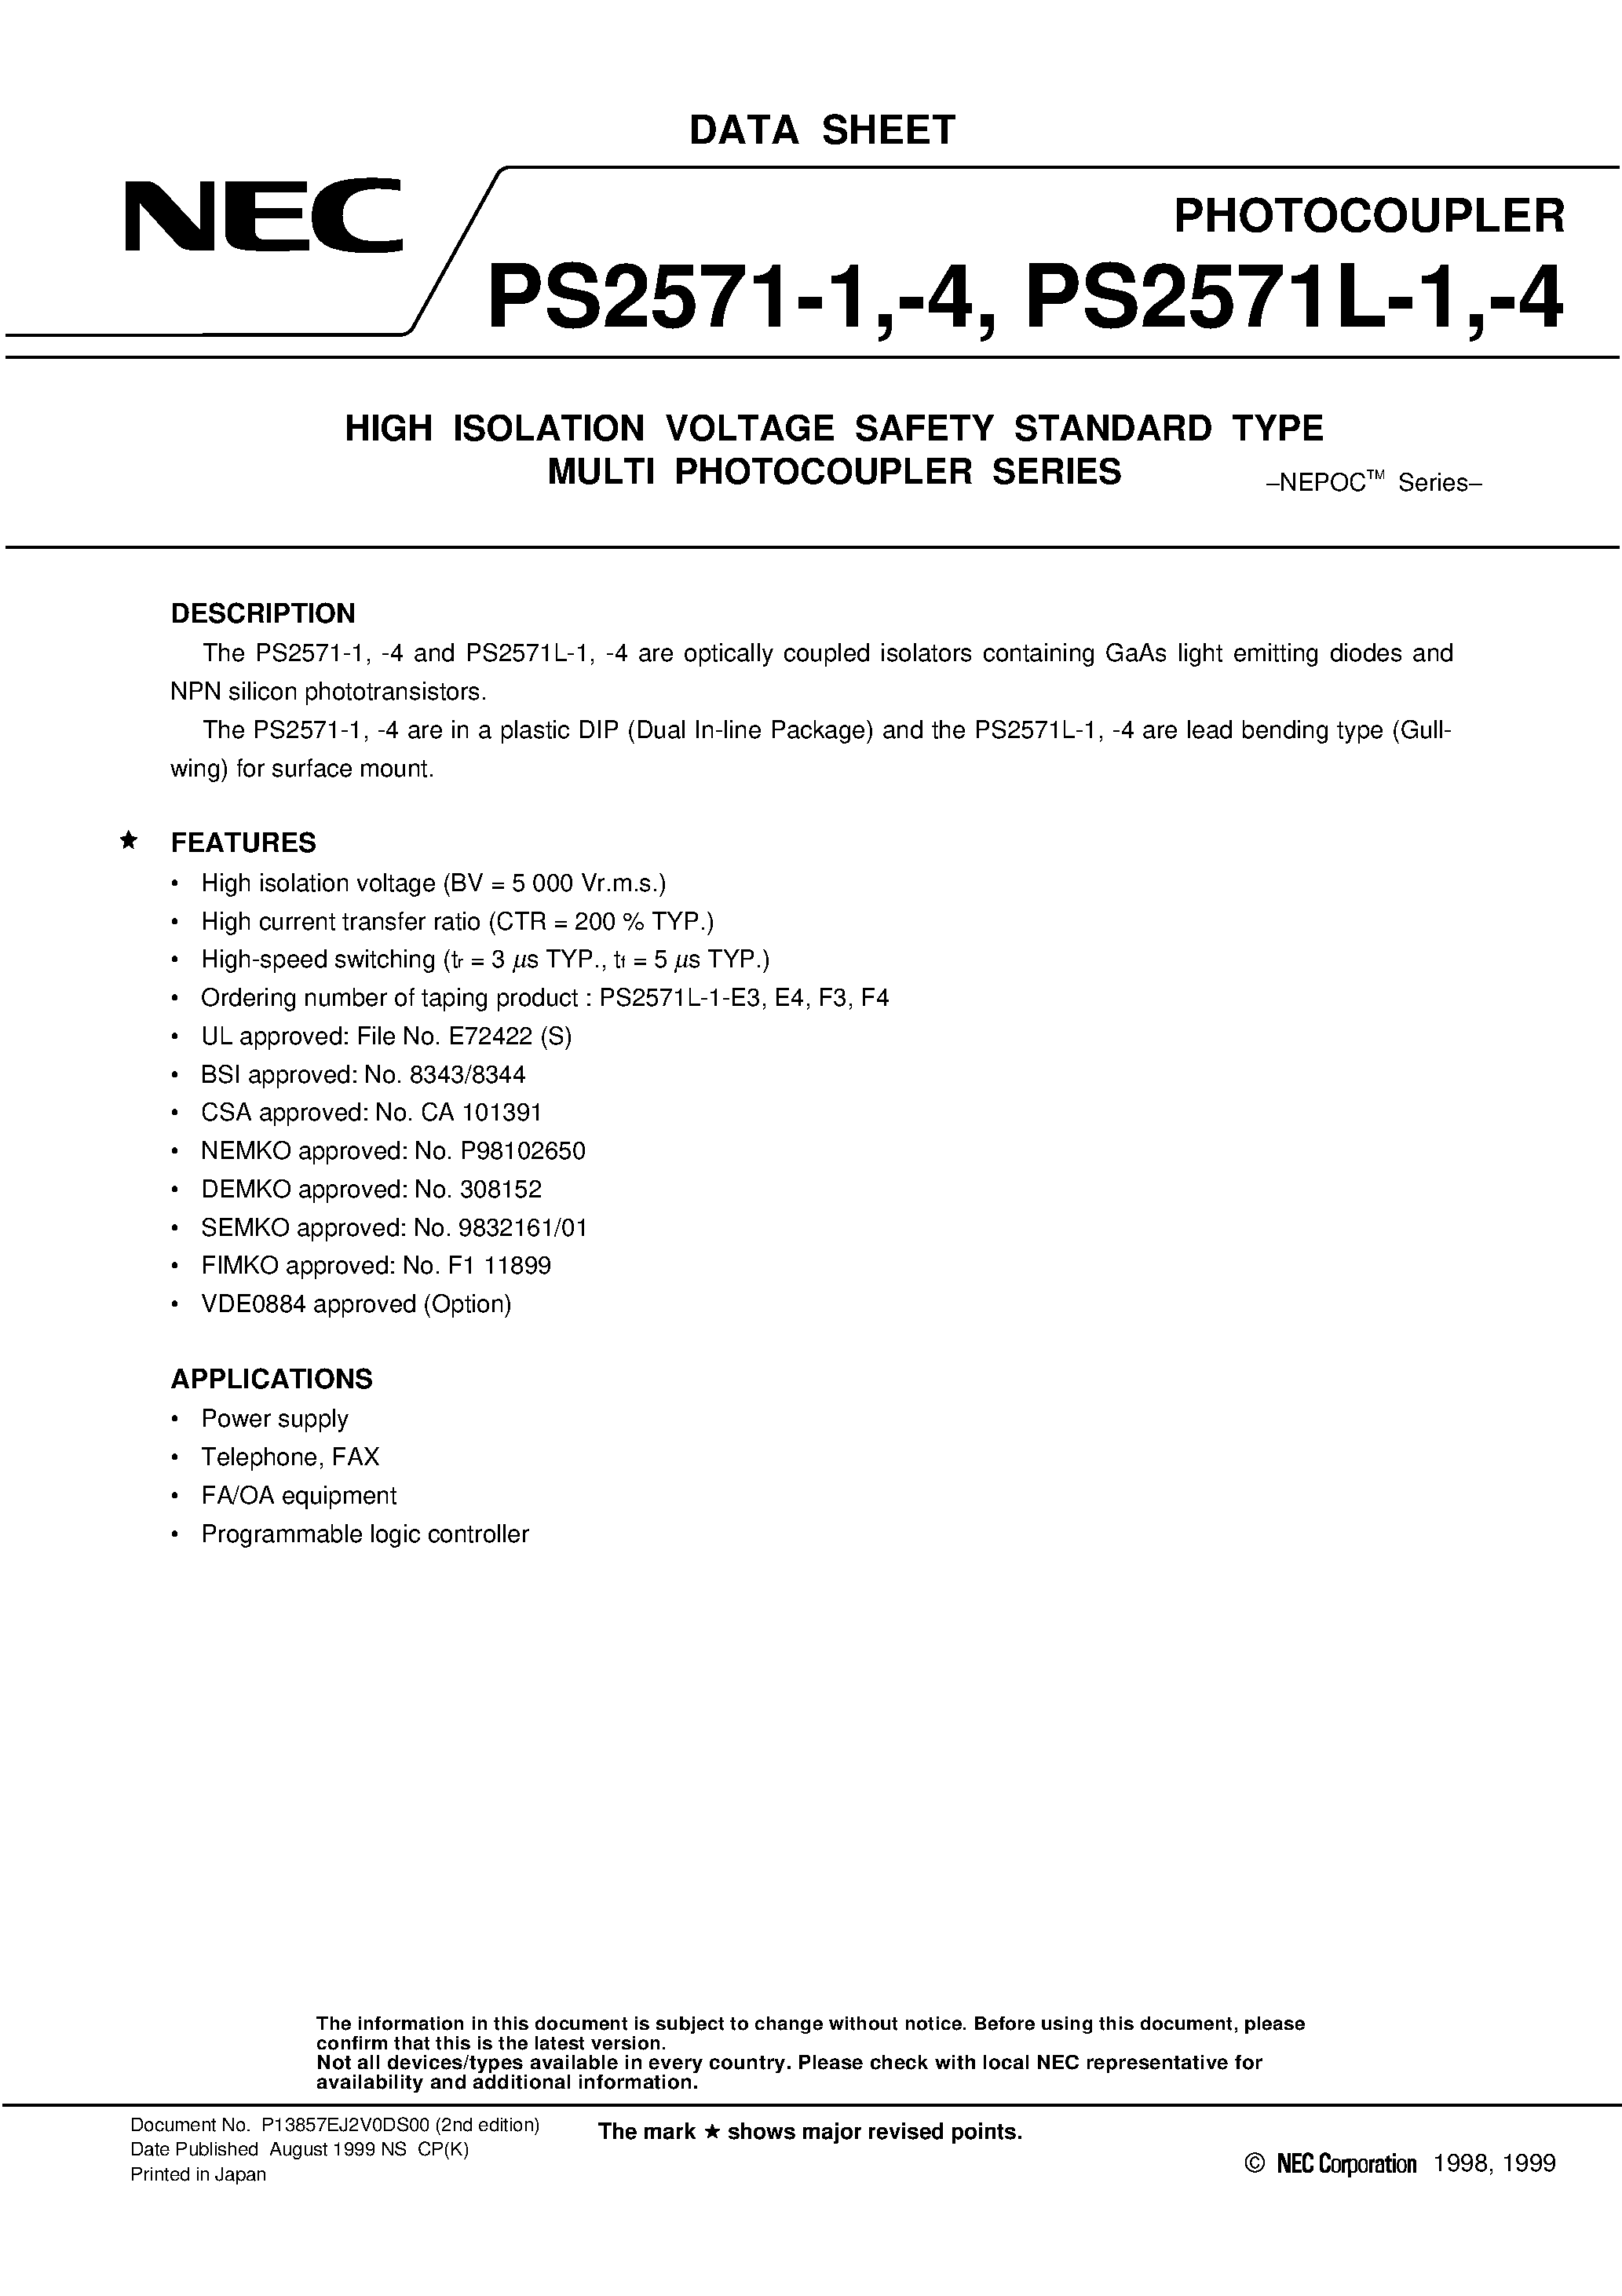 Datasheet PS2571L-1-V-F3 - HIGH ISOLATION VOLTAGE SAFETY STANDARD TYPE MULTI PHOTOCOUPLER SERIES page 1